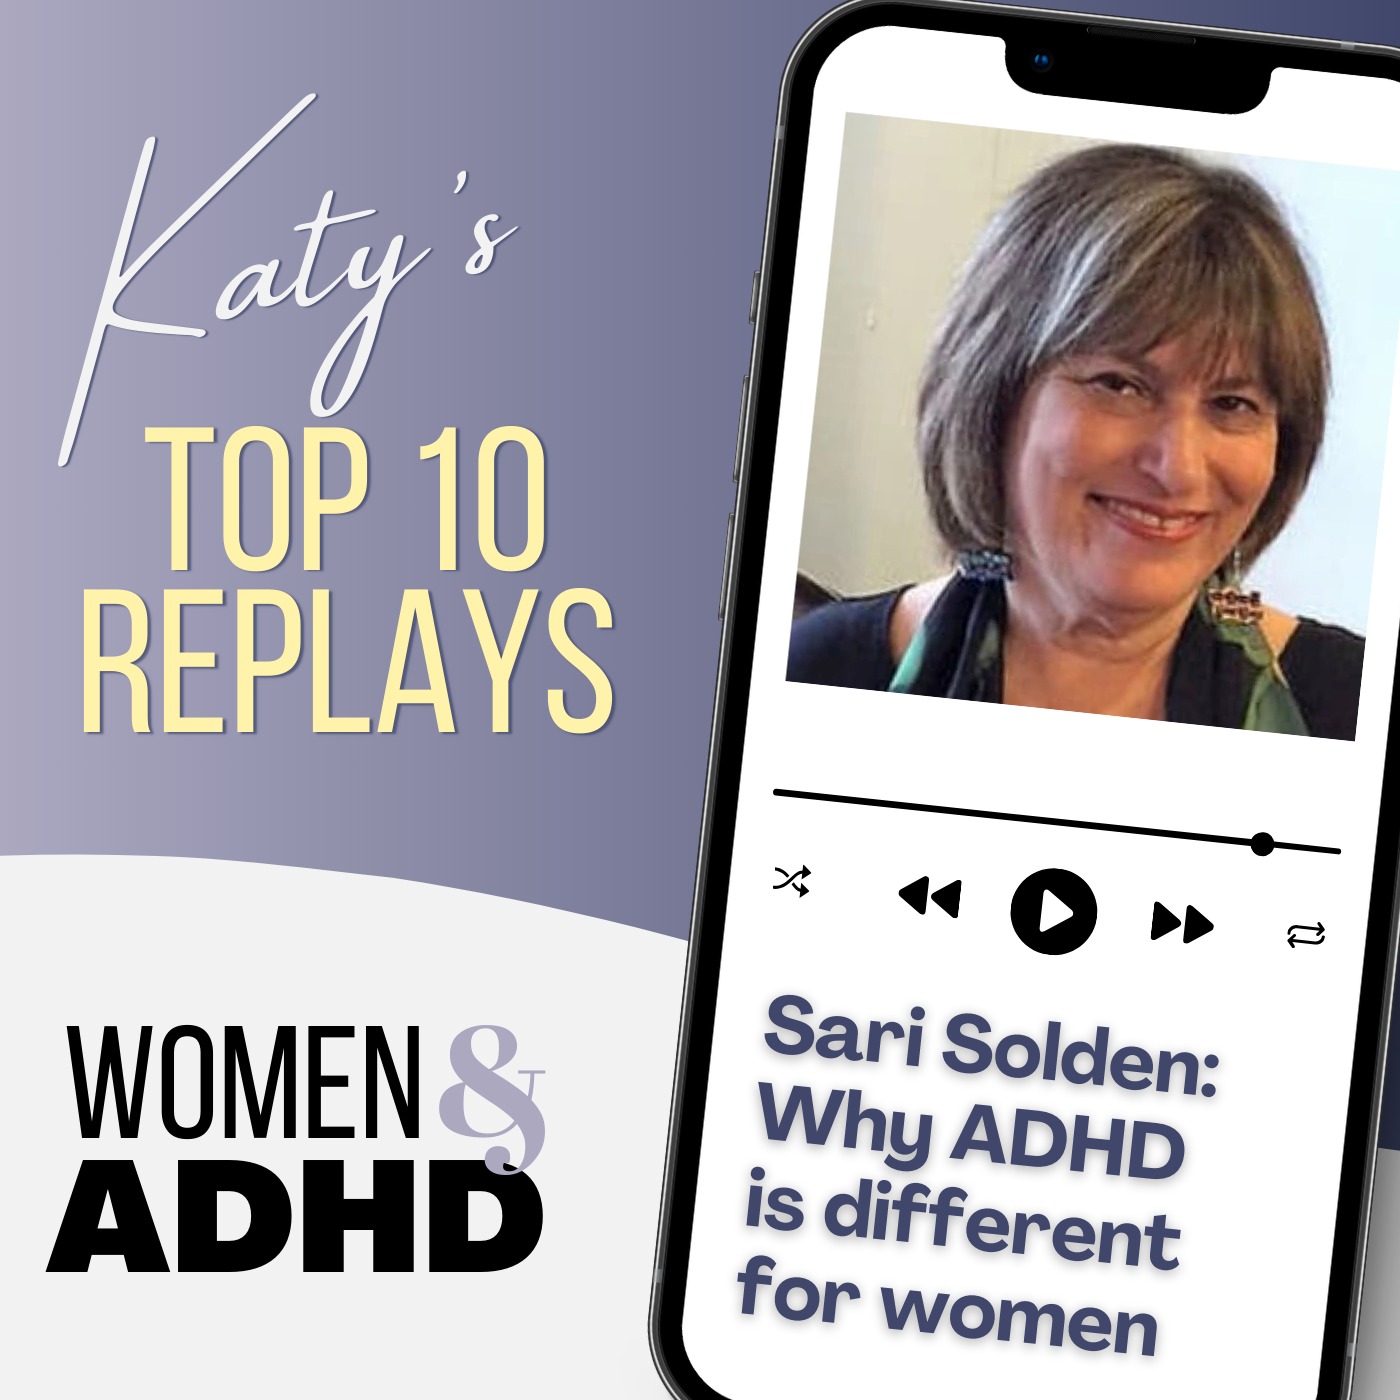 Sari Solden: Why ADHD is different for women [Top 10 Replay with Bonus Update]